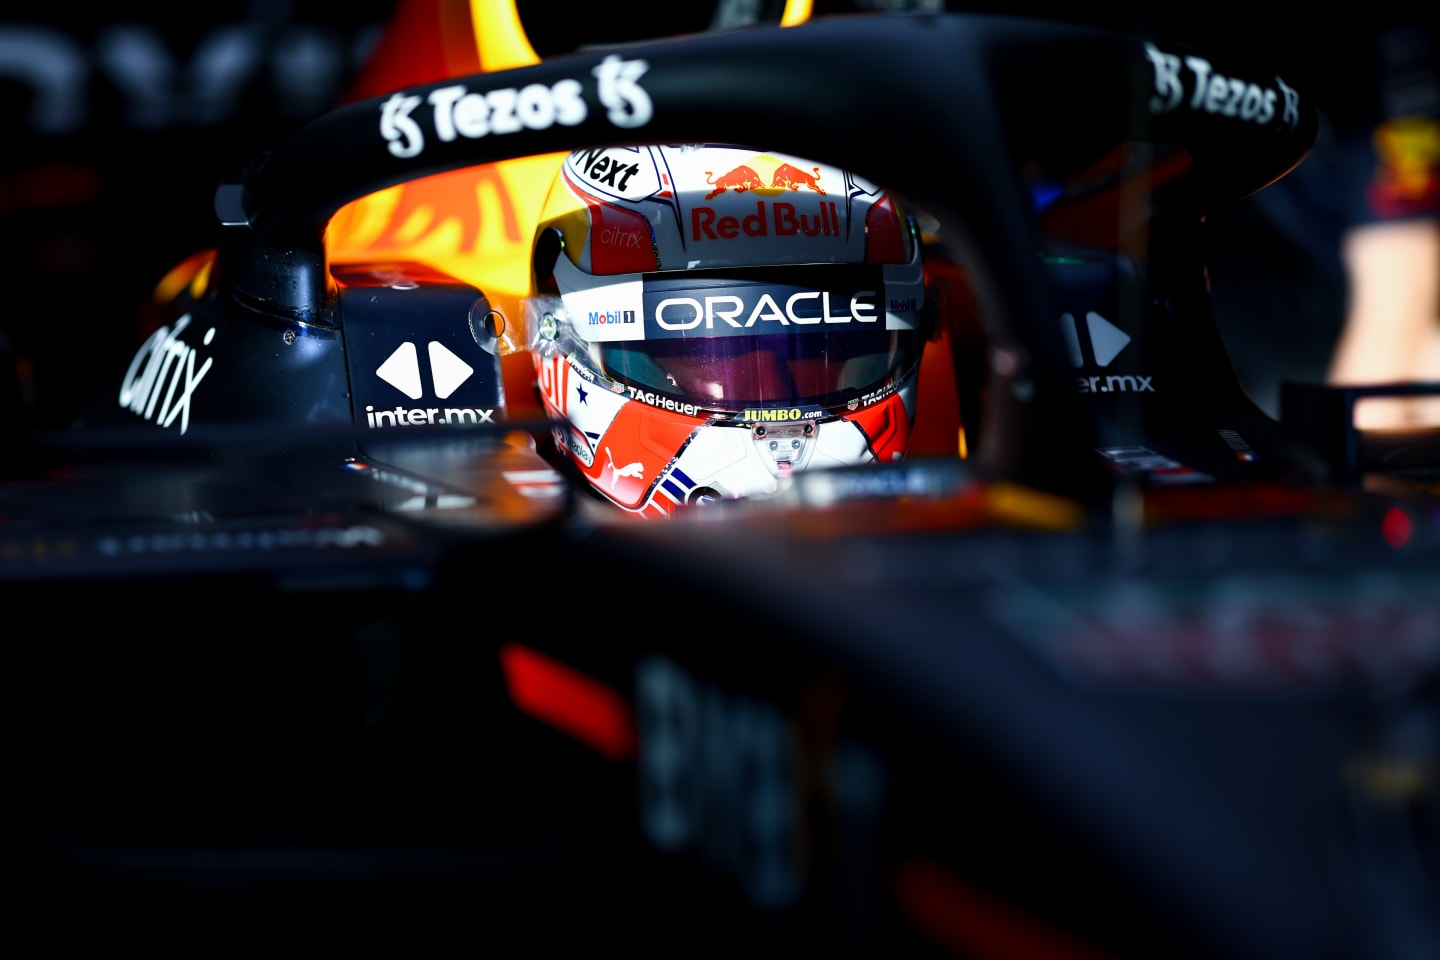 AUSTIN, TEXAS - OCTOBER 22: Max Verstappen of the Netherlands and Oracle Red Bull Racing prepares to drive in the garage during qualifying ahead of the F1 Grand Prix of USA at Circuit of The Americas on October 22, 2022 in Austin, Texas. (Photo by Mark Thompson/Getty Images )